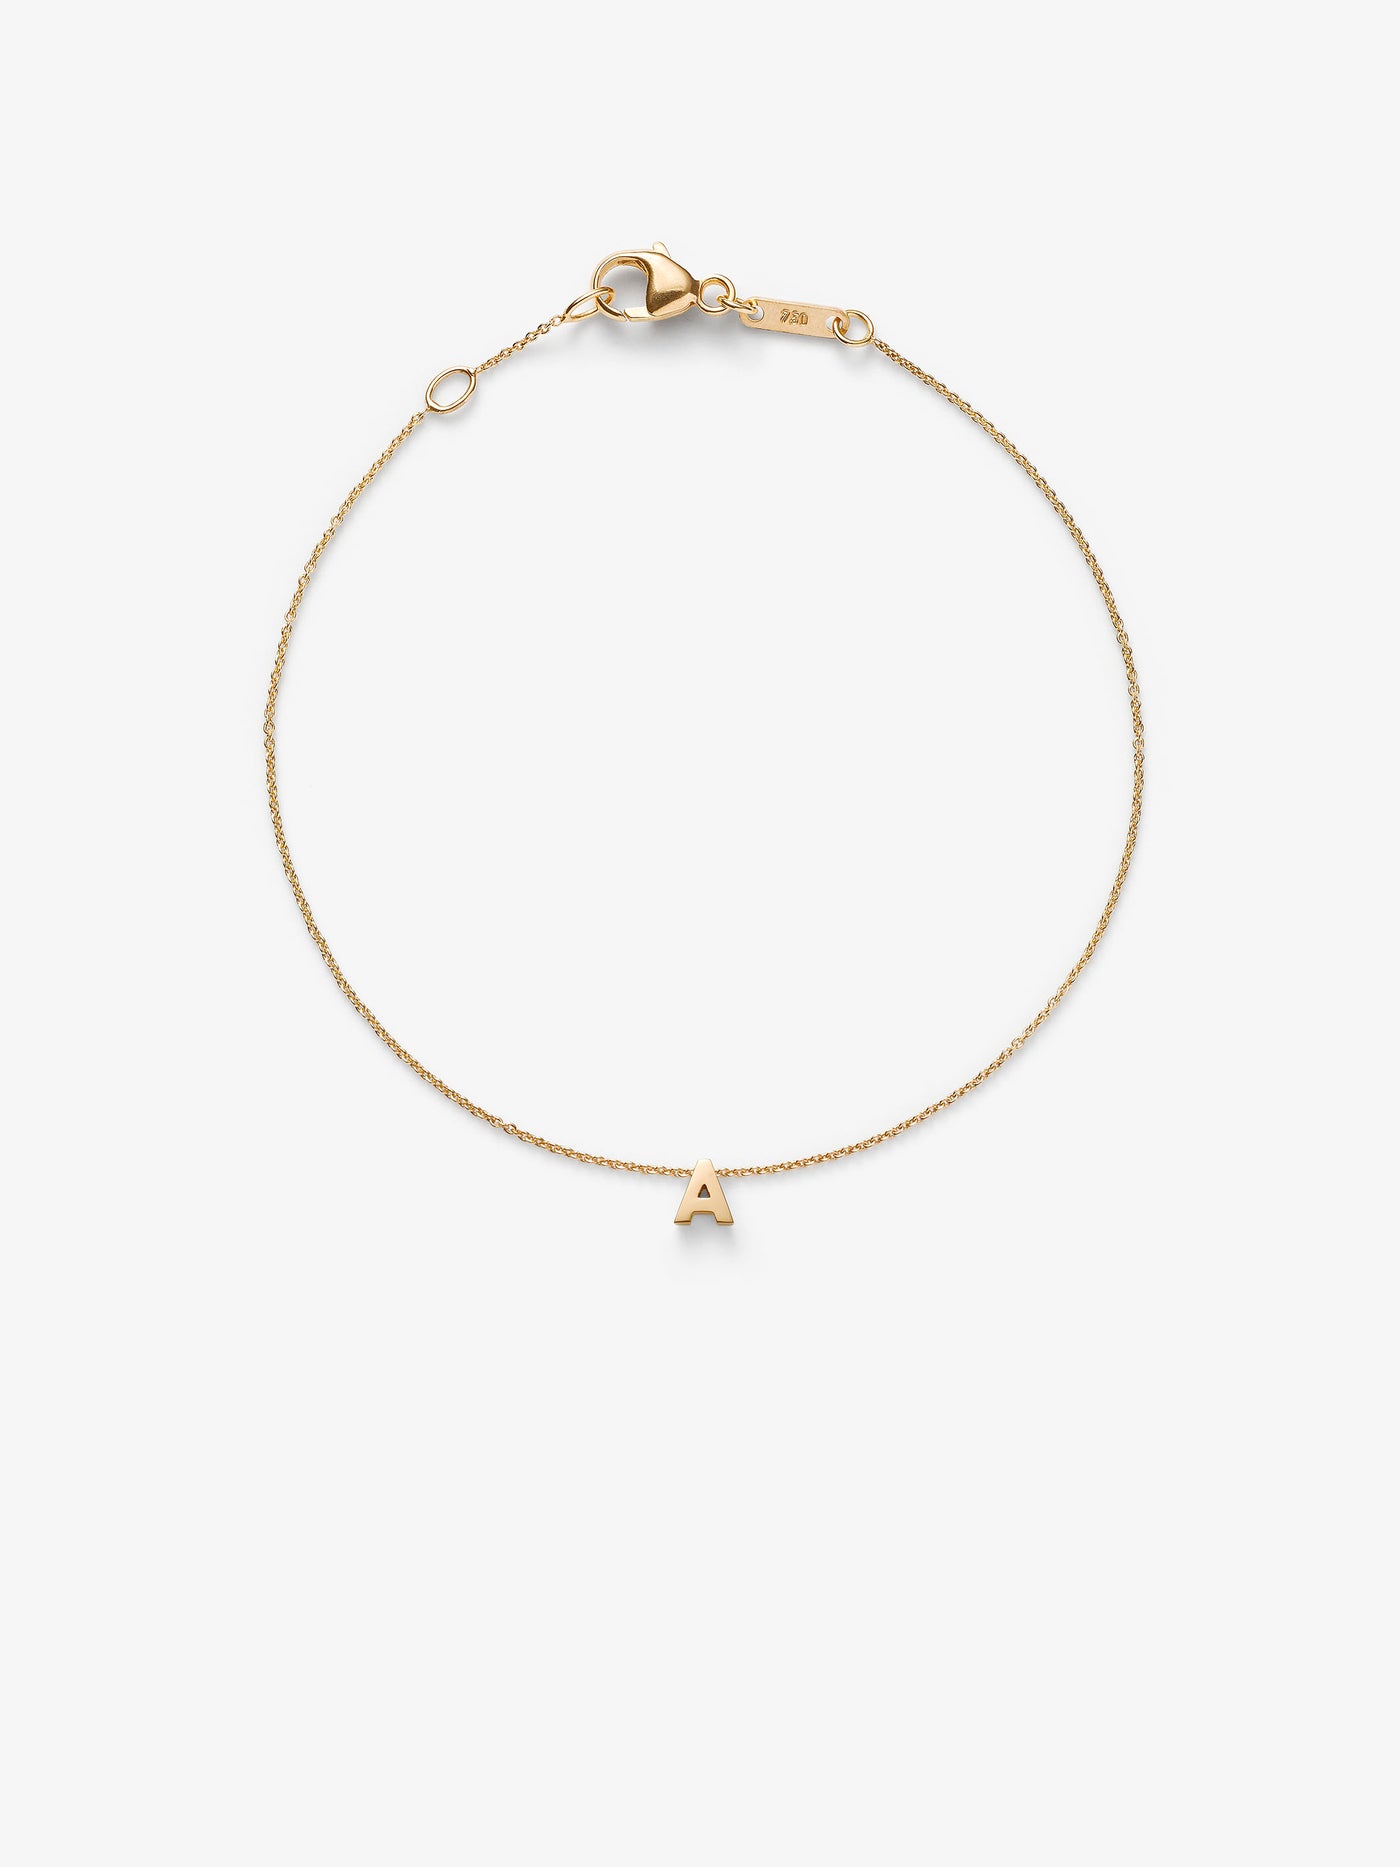 Miniature three-dimensional one letter in 18k solid gold, thread onto an adjustable bracelet chain